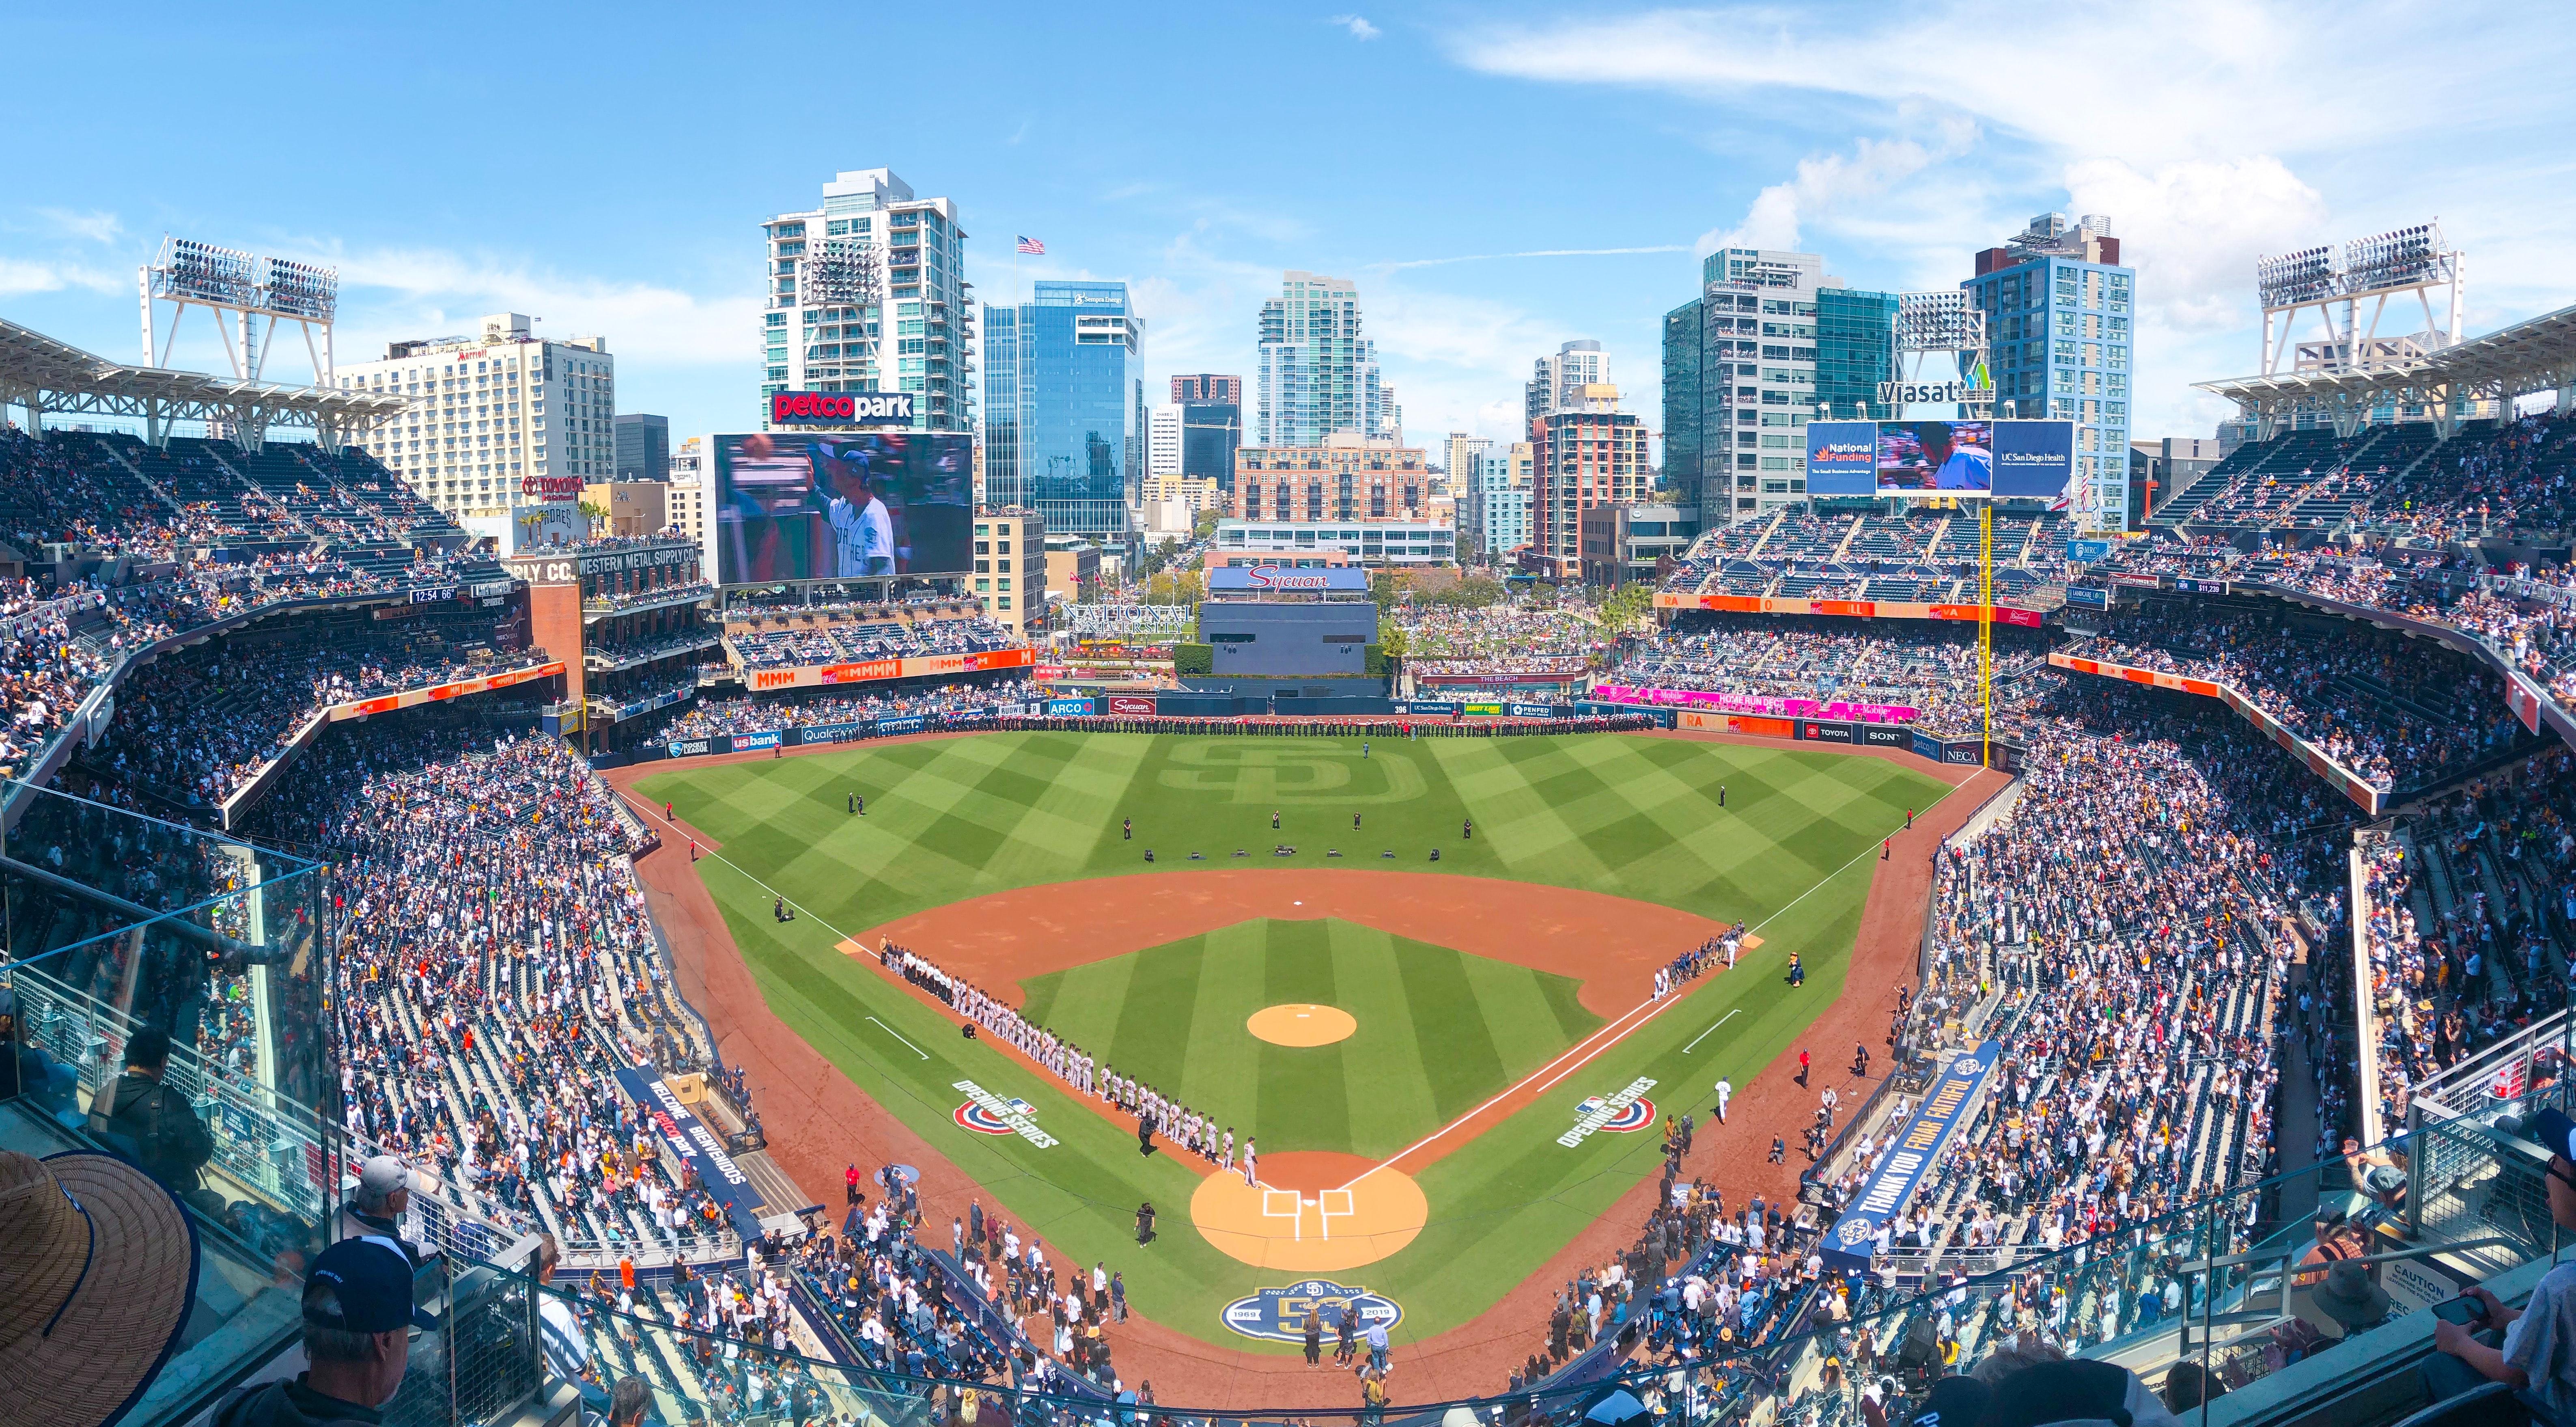 Check out what's new at Petco Park in 2023